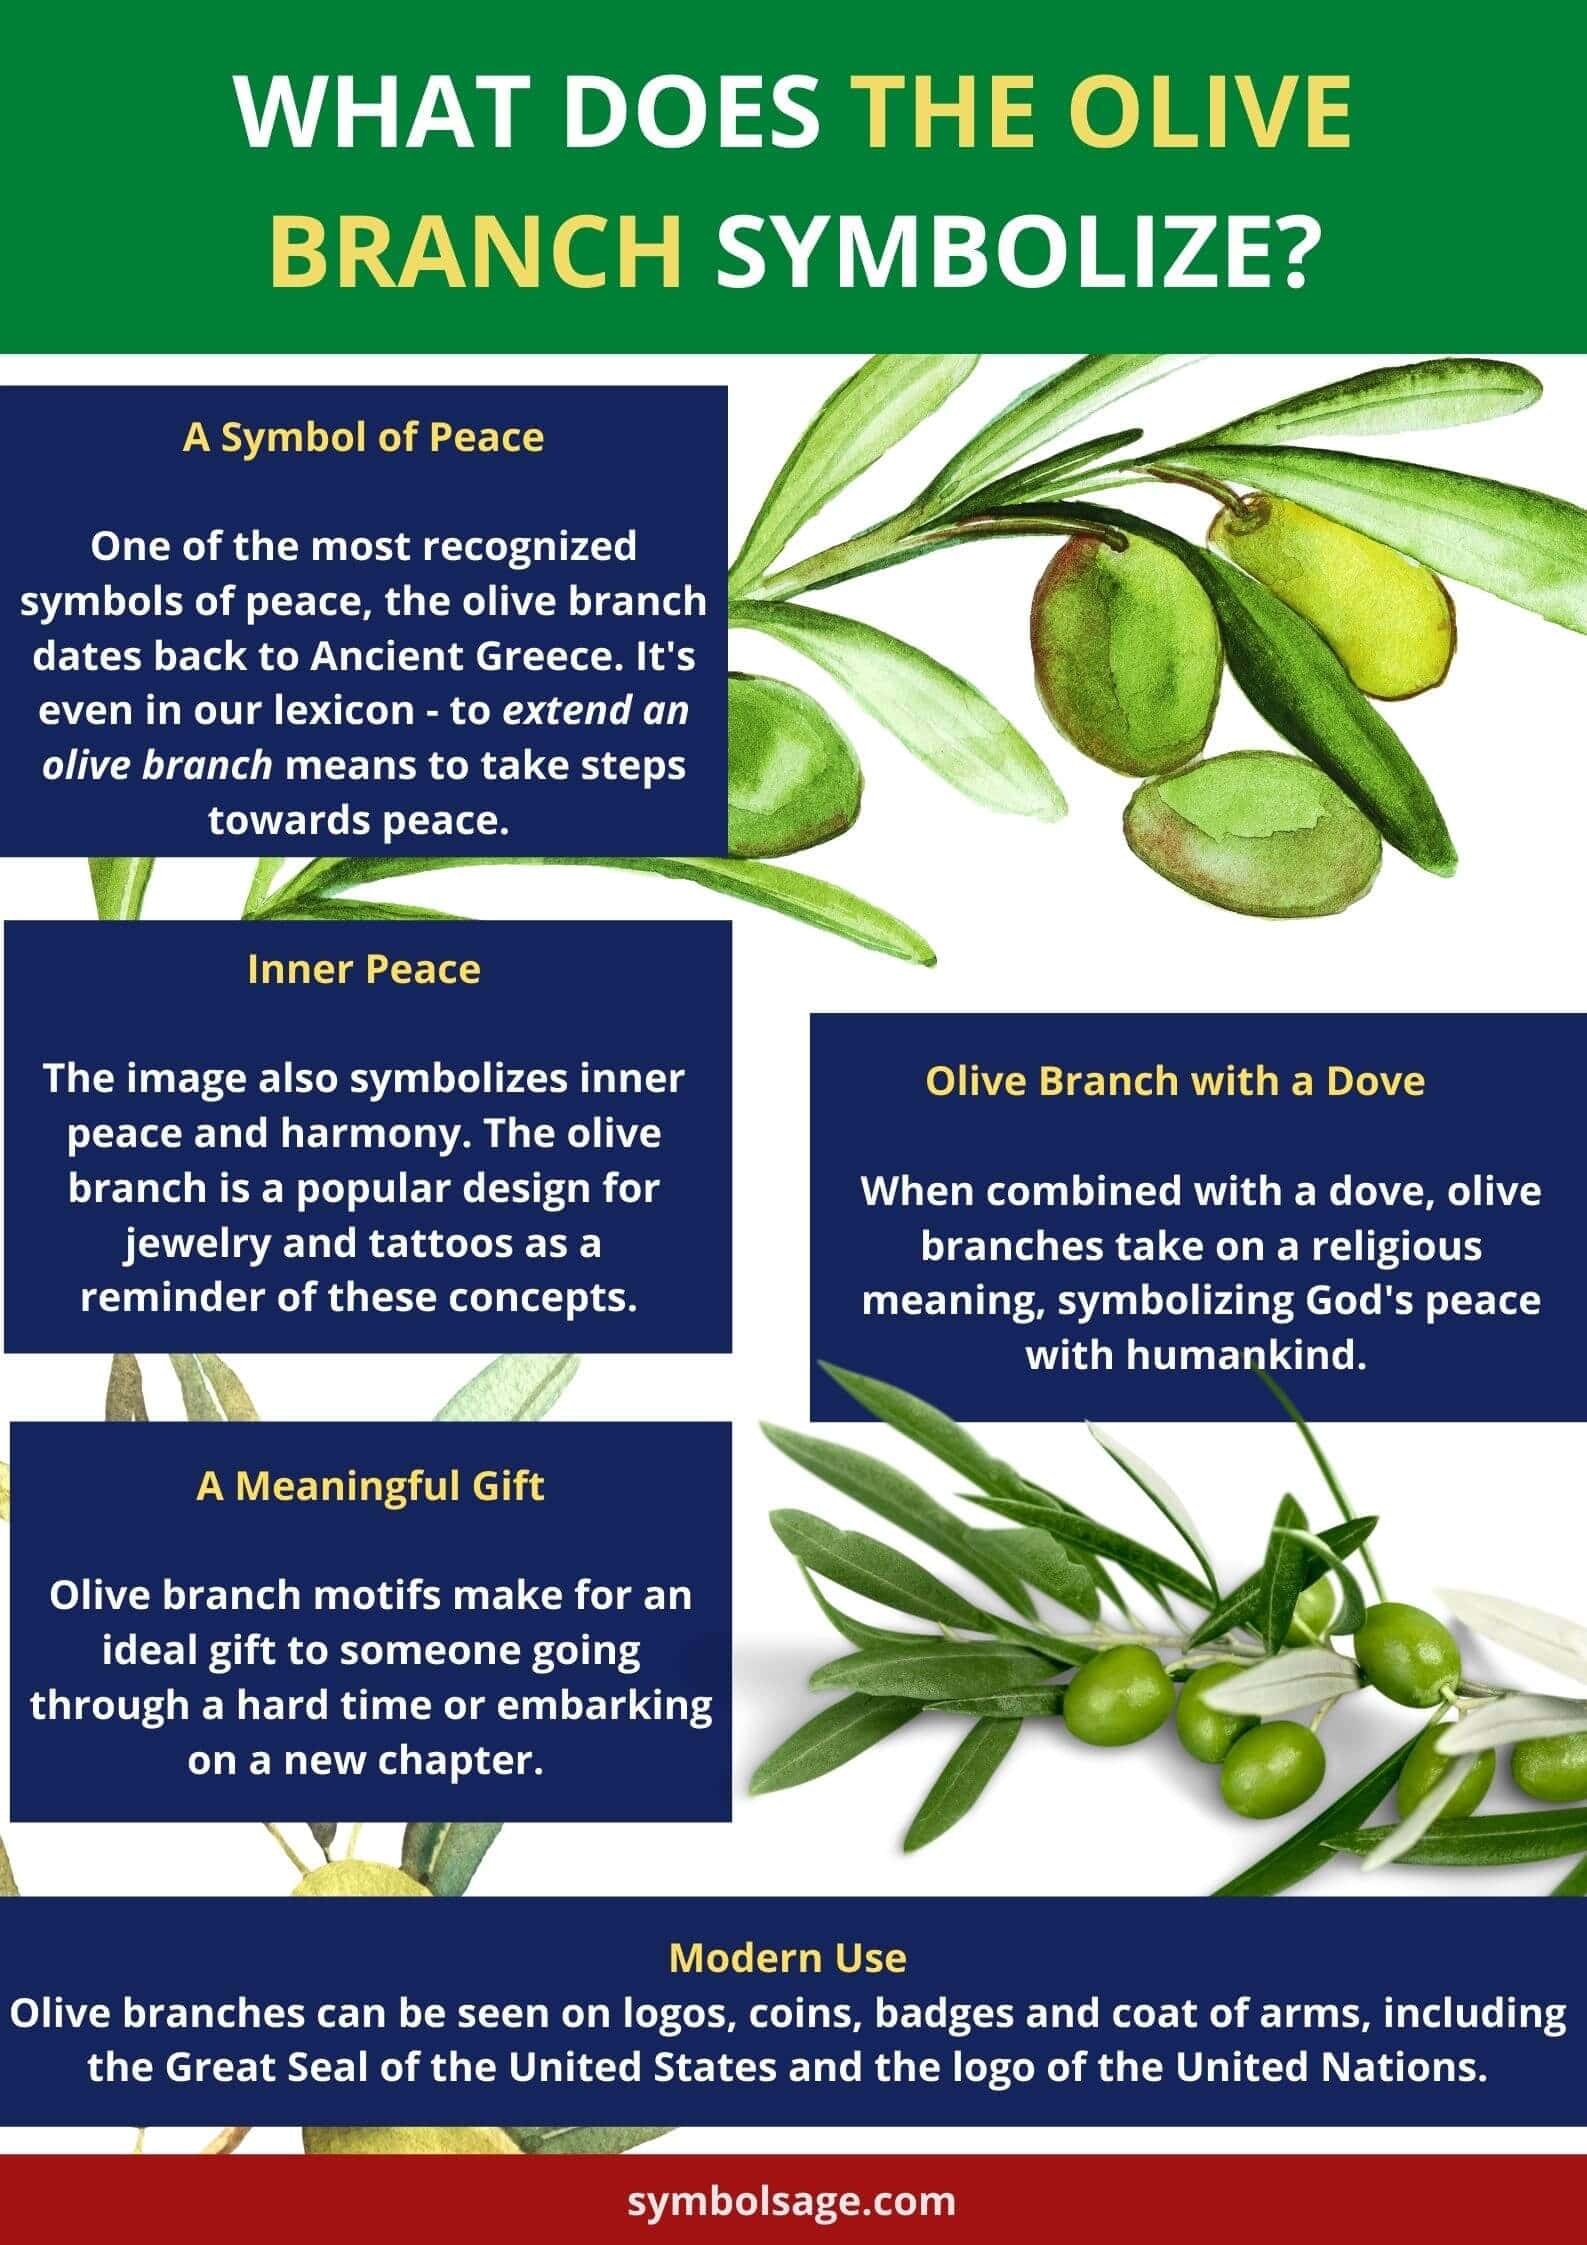 Olive branch origins and meaning